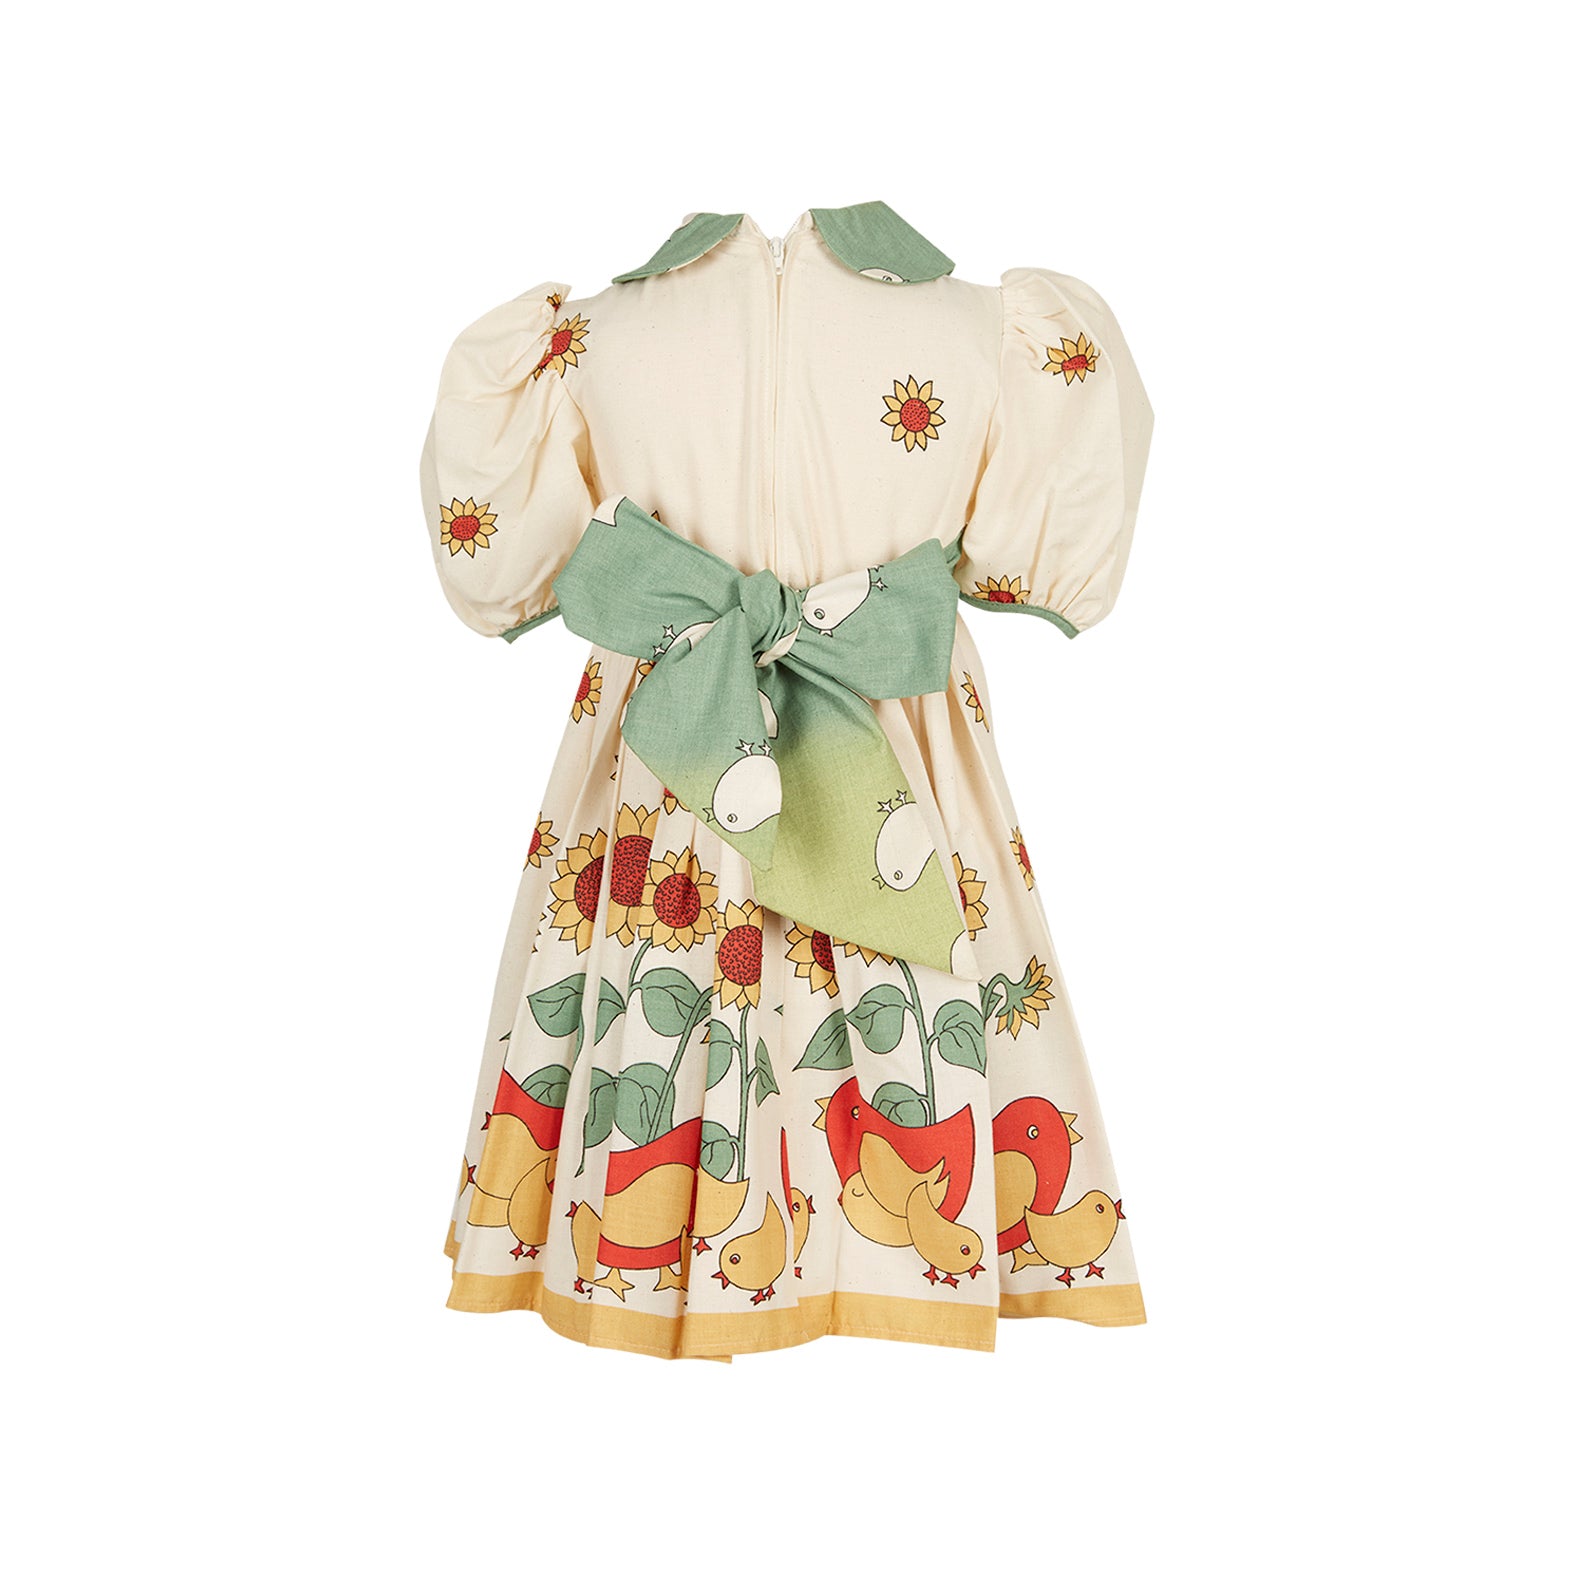 Archive Poppy - Charlie Dress - Natural Sunflowers